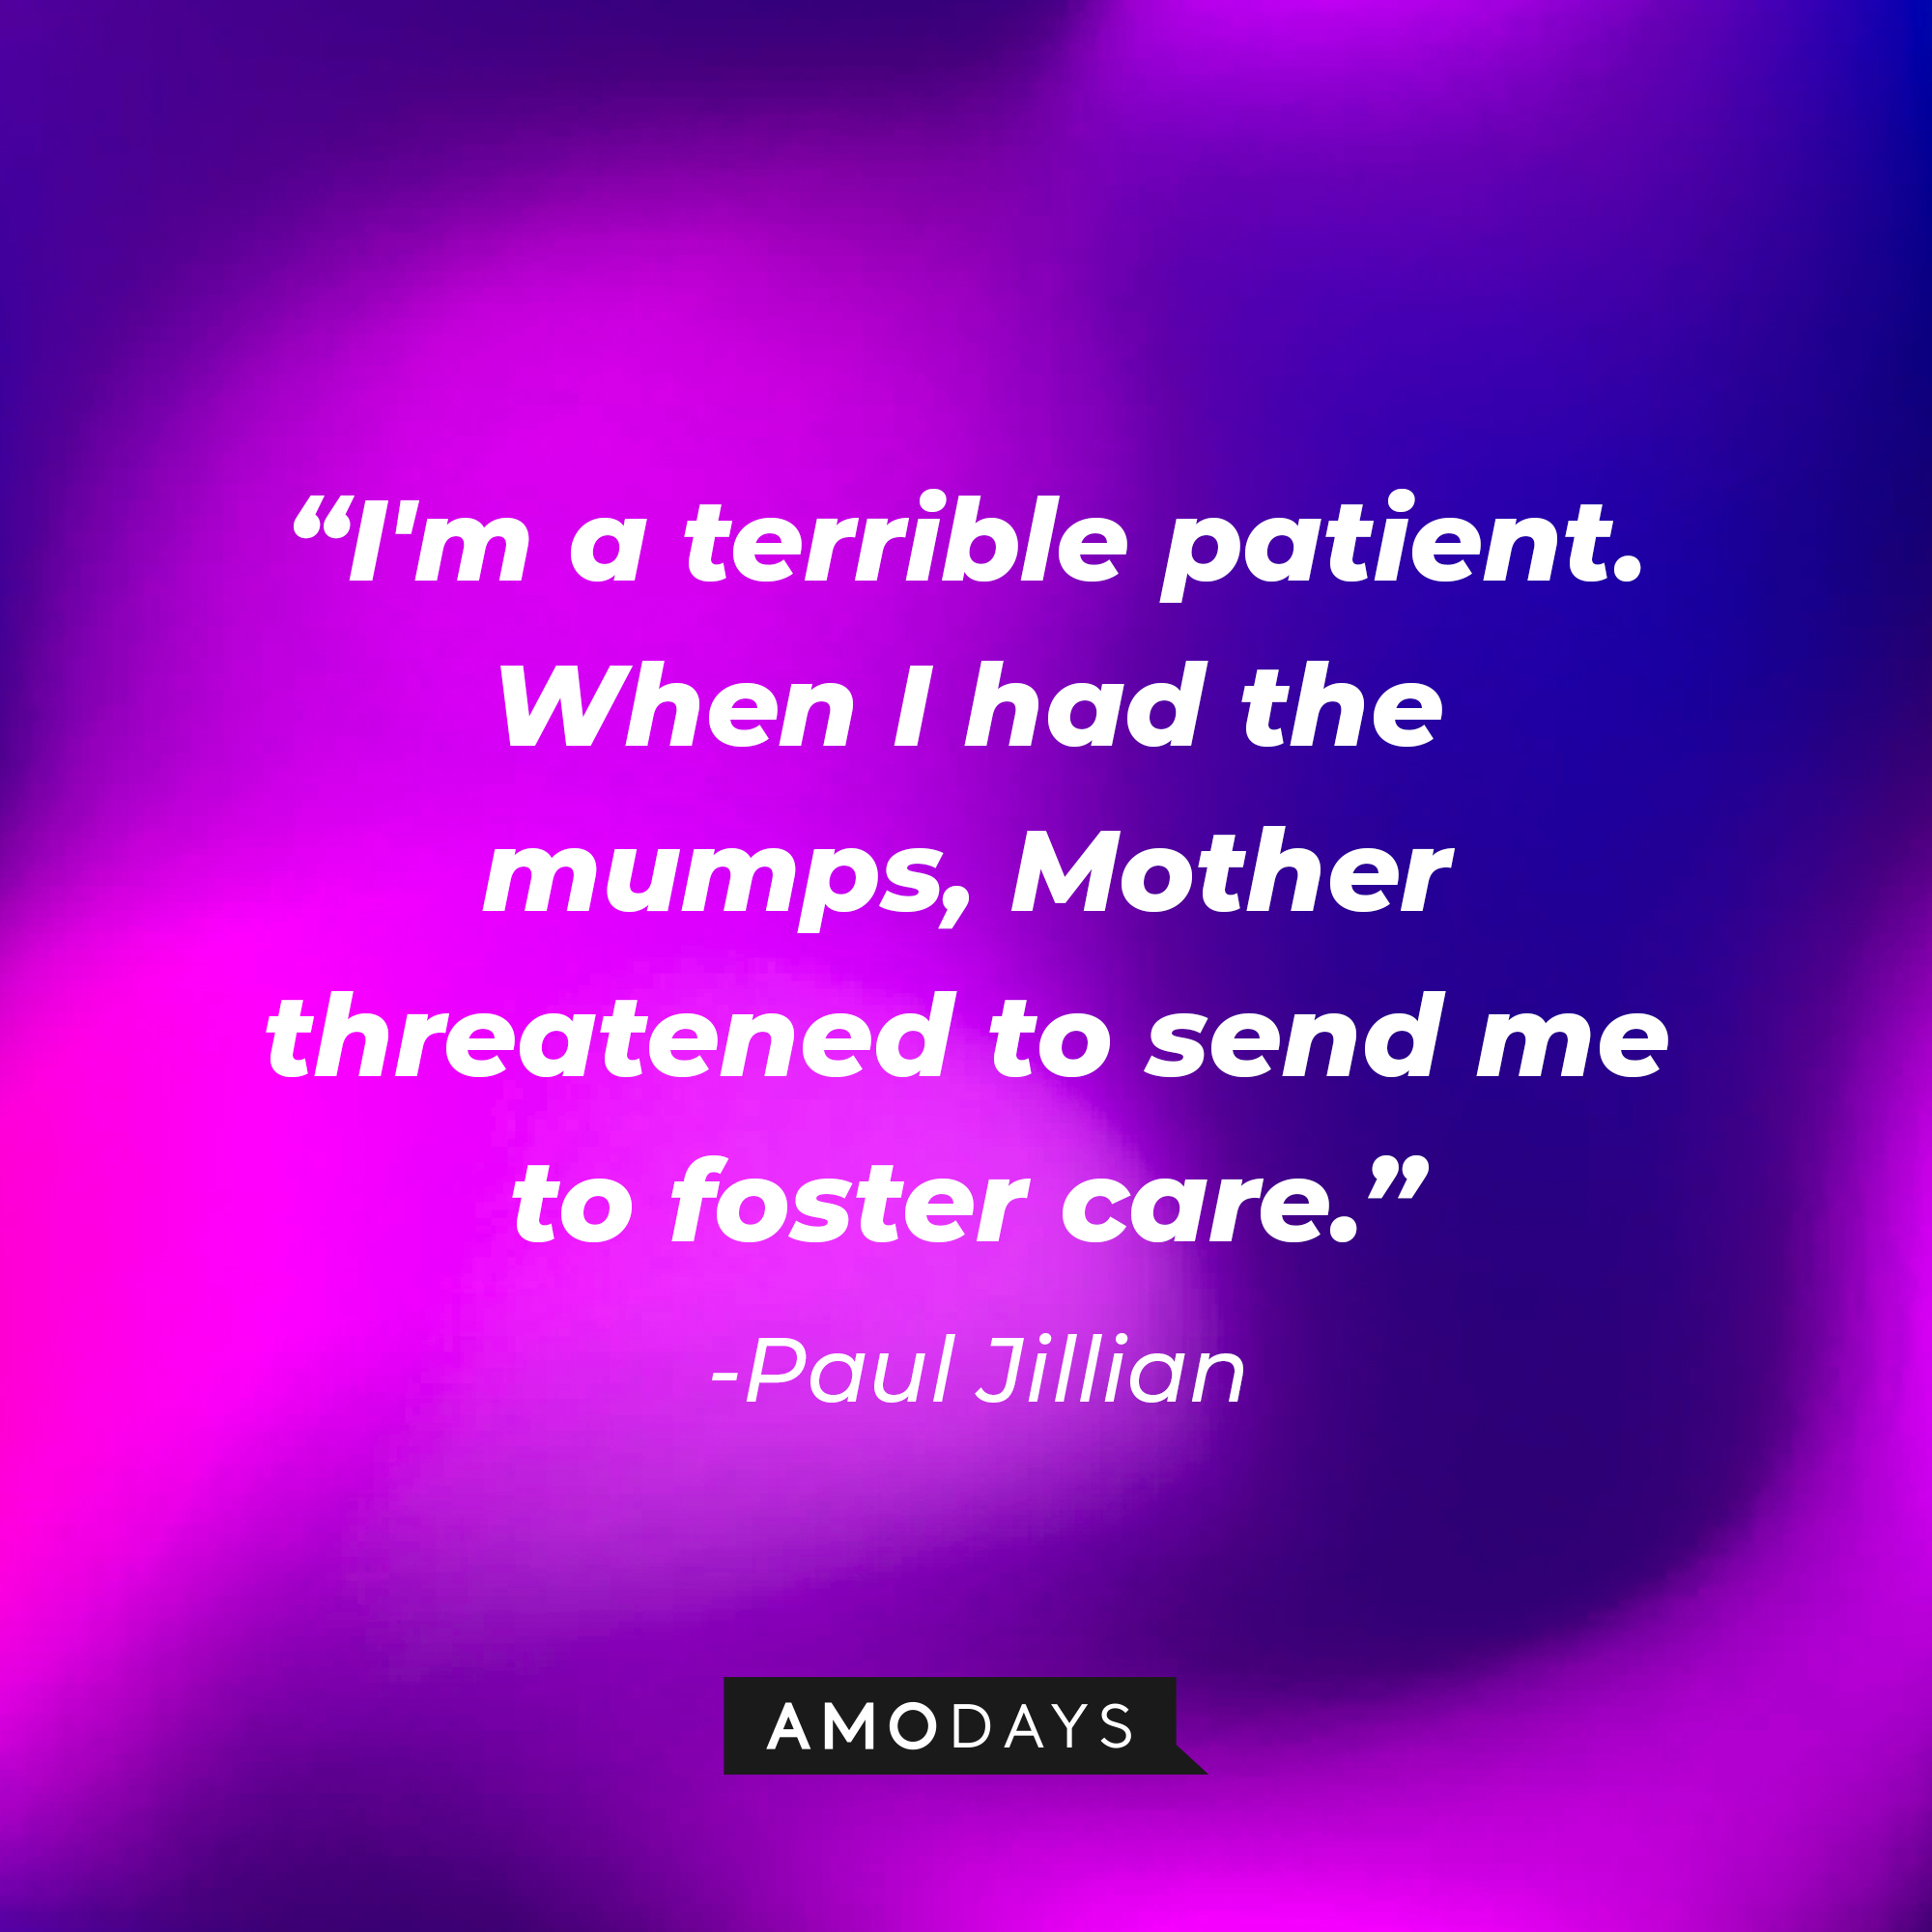 Paul Jillian’s quote: “I'm a terrible patient. When I had the mumps, Mother threatened to send me to foster care.” | Source: AmoDays